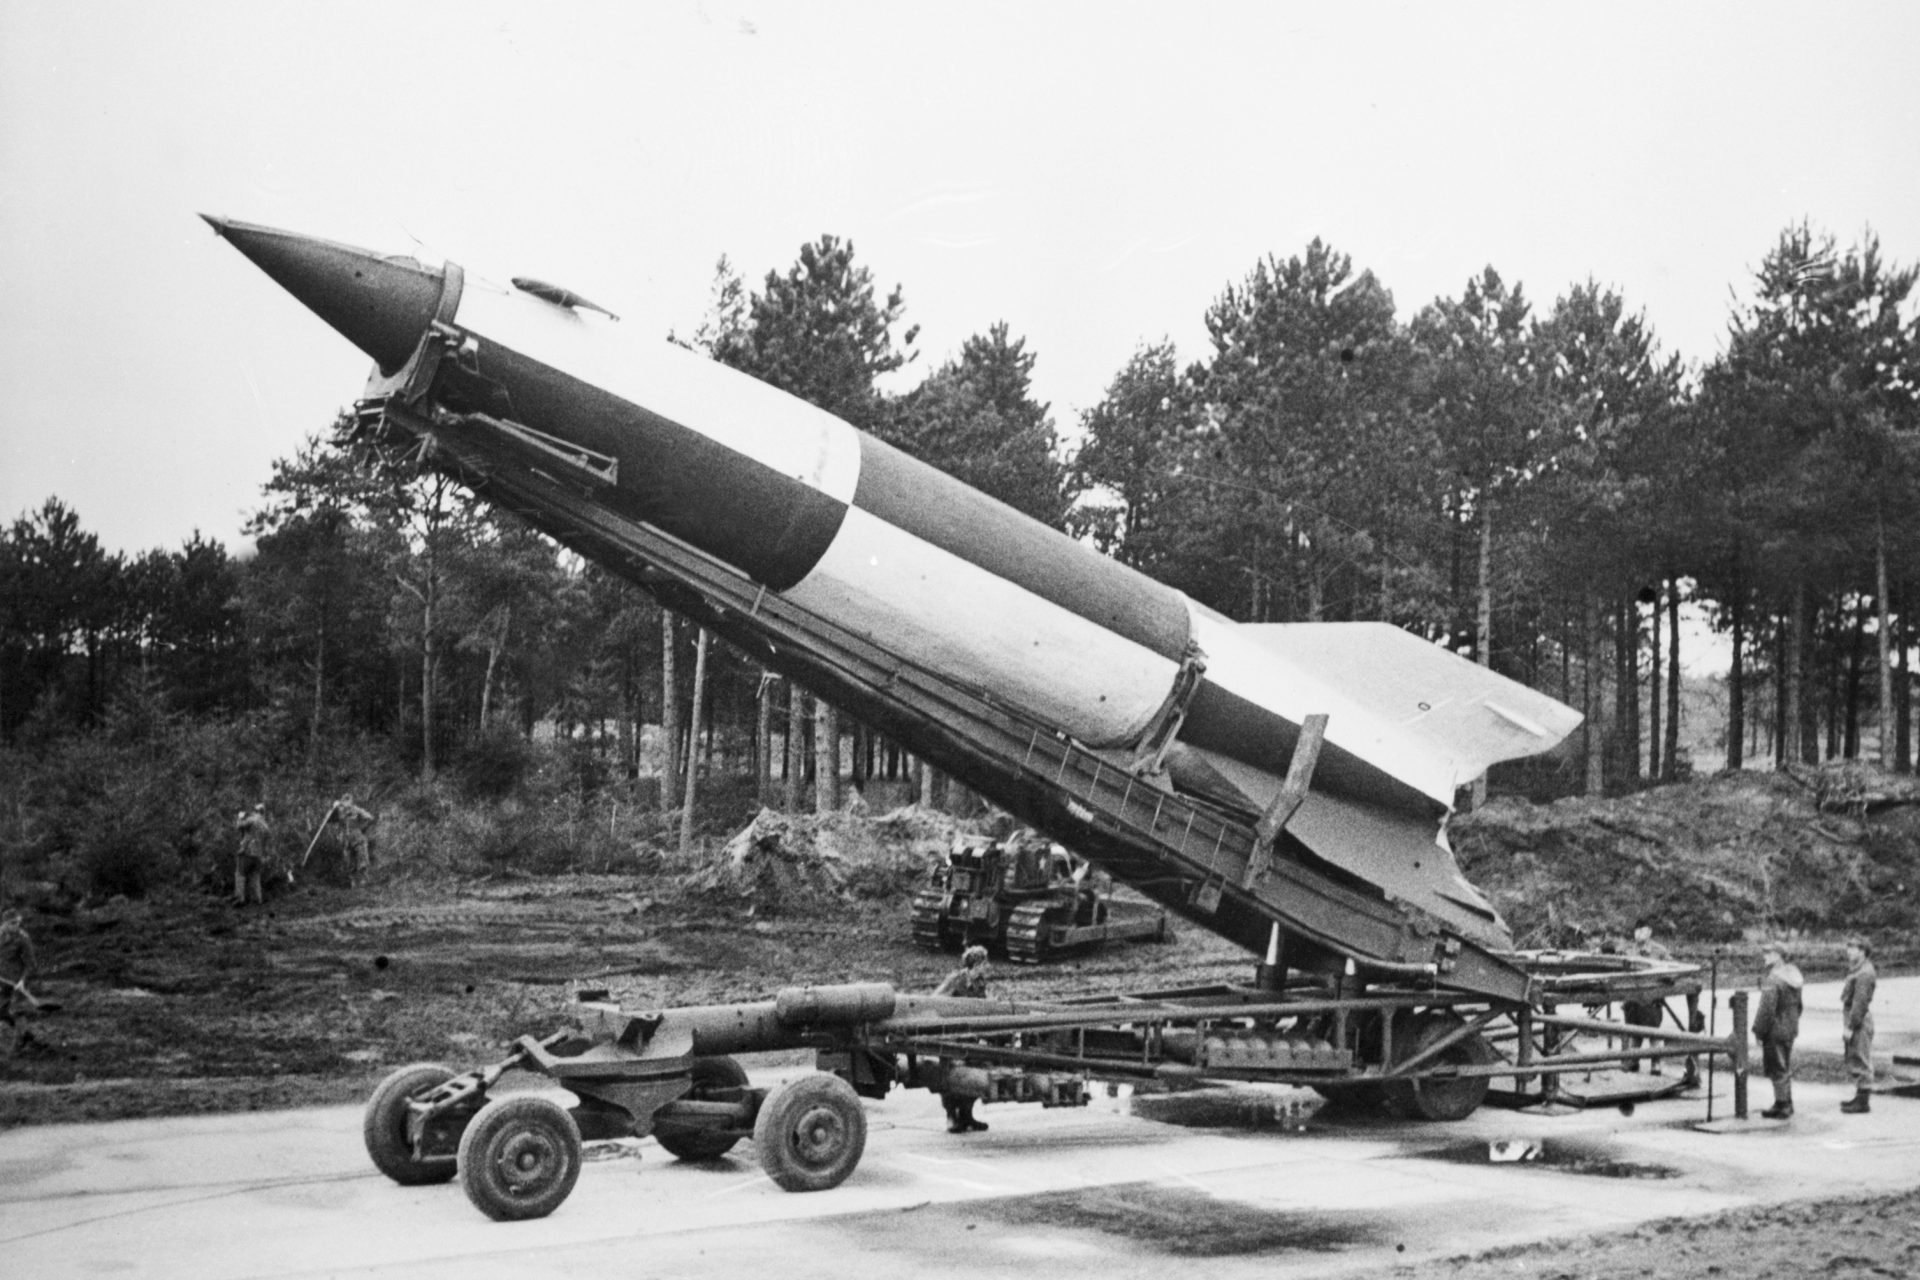 Experts look into the secrets of Nazi rocket science